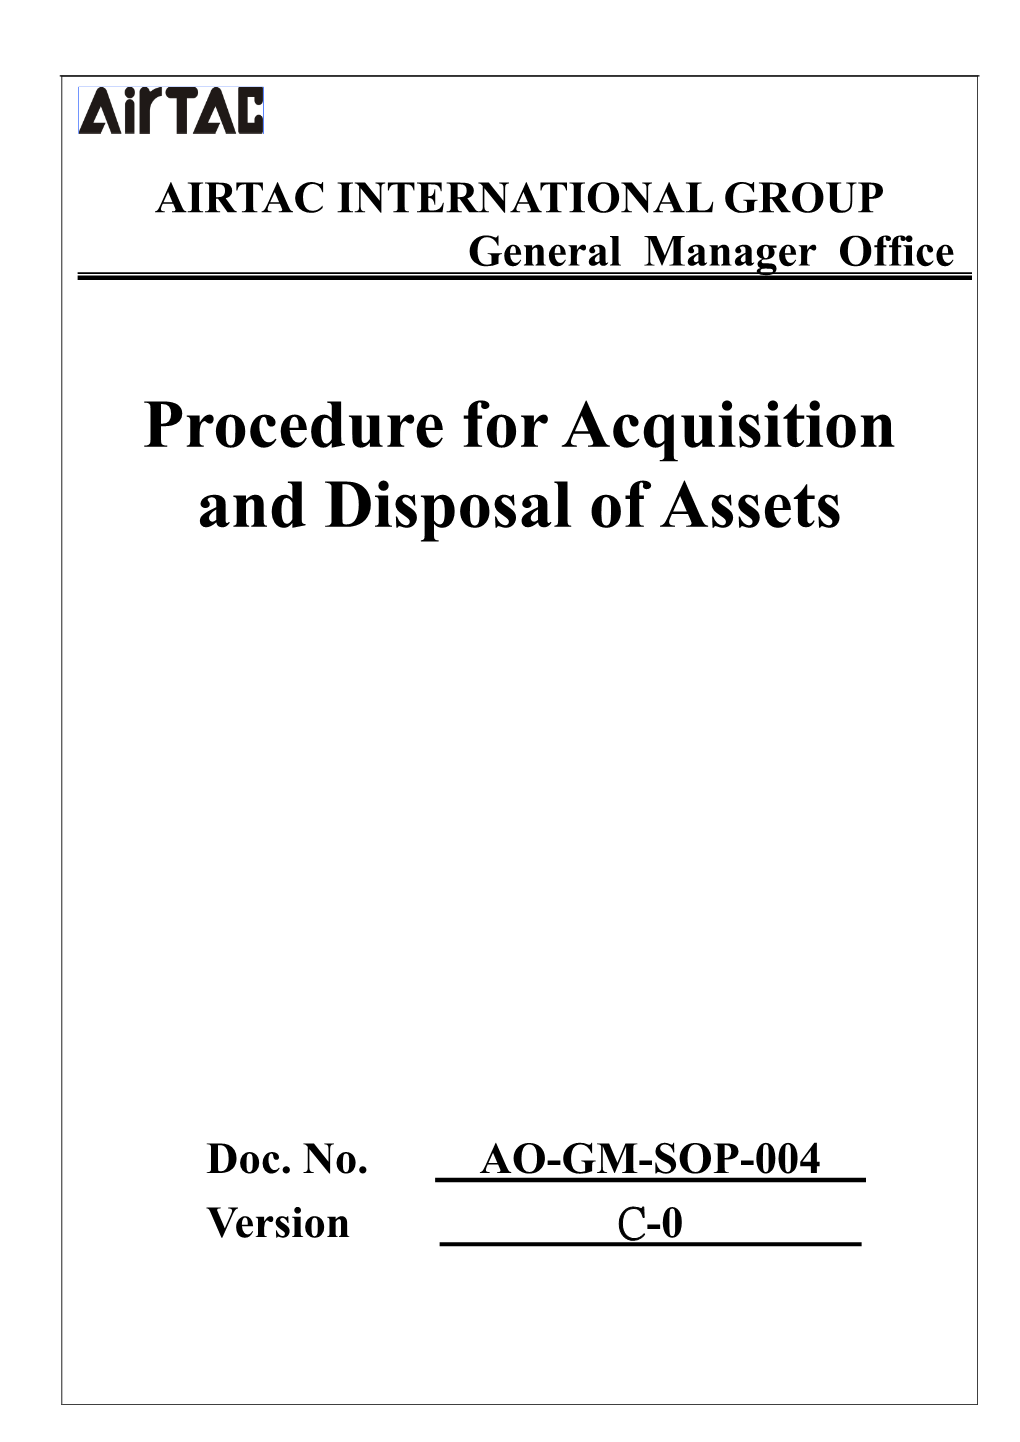 Procedure for Acquisition and Disposal of Assets